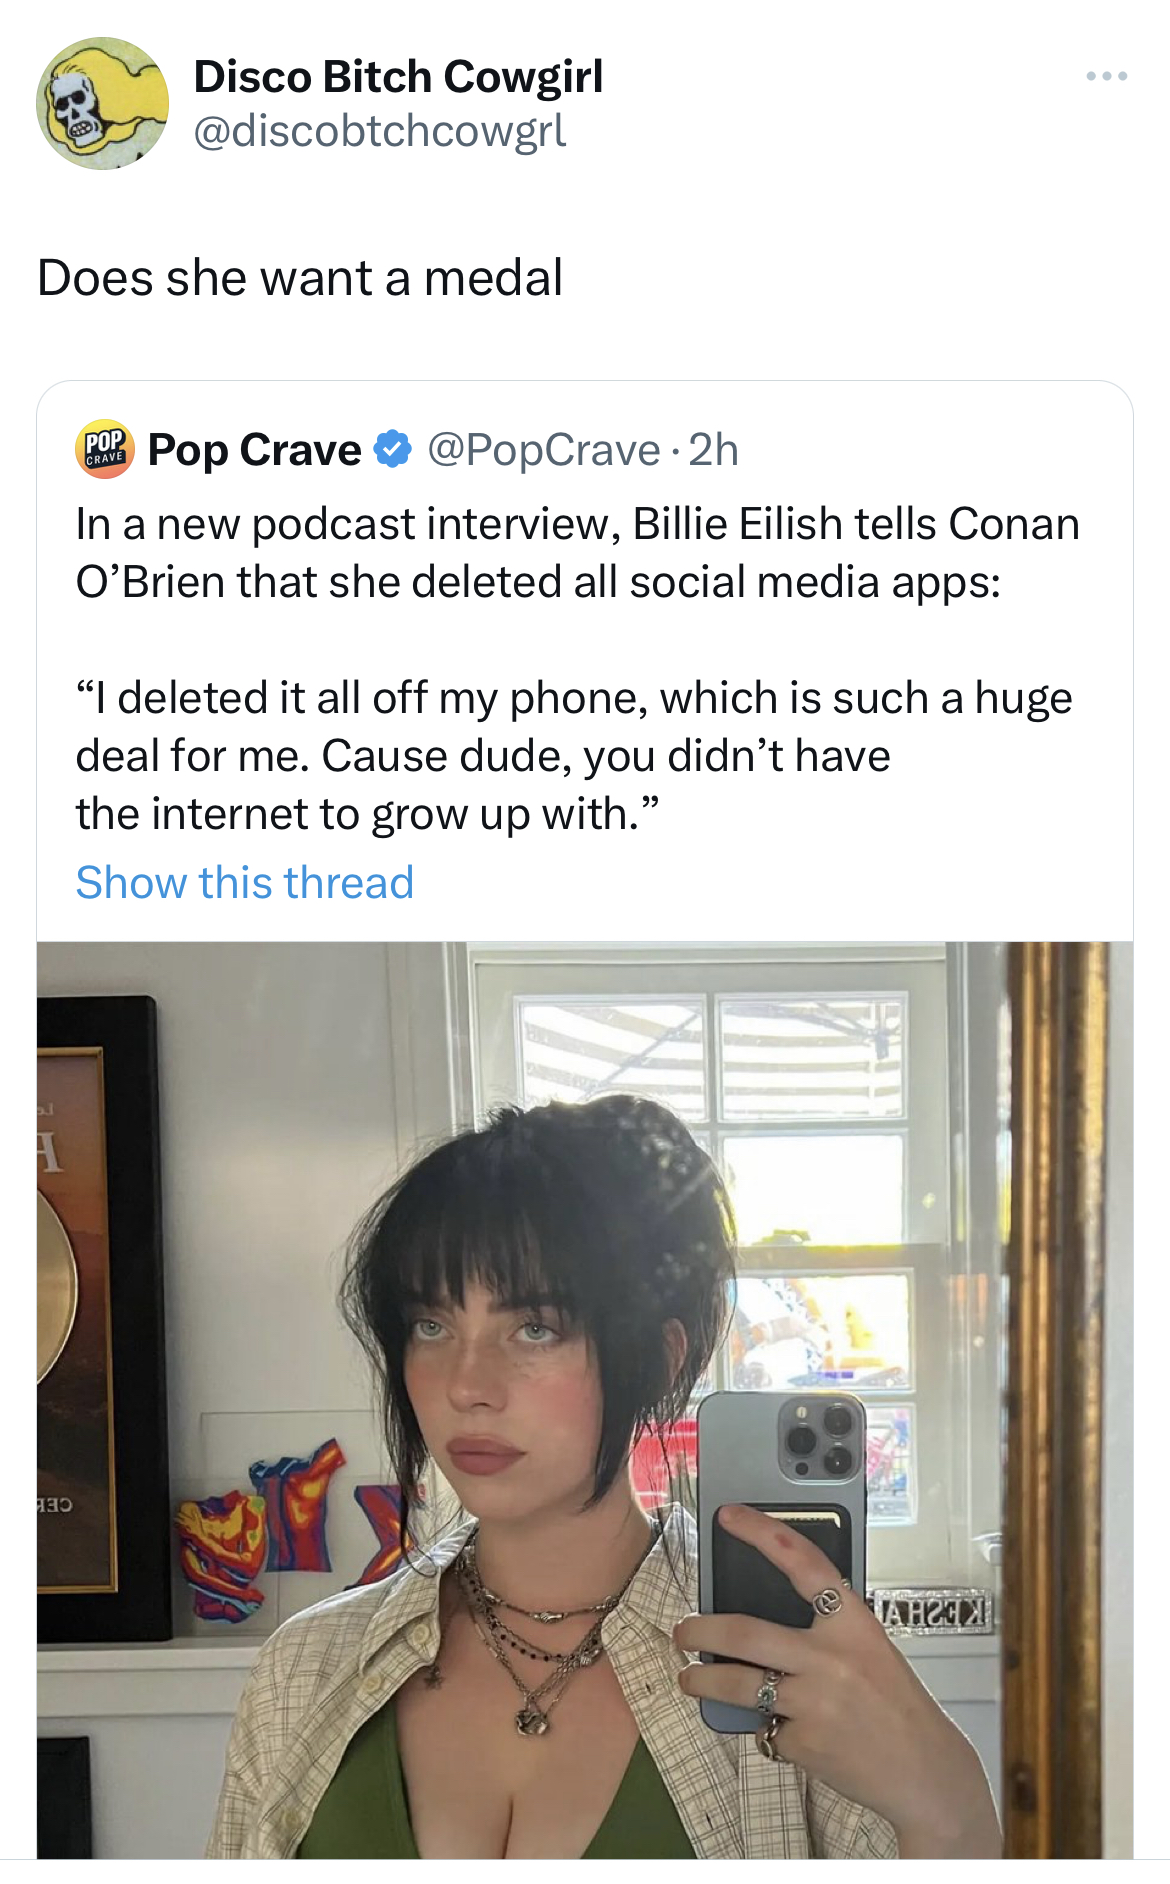 tweets roasting celebs - billie eilish hot - Disco Bitch Cowgirl Does she want a medal Pop Crave In a new podcast interview, Billie Eilish tells Conan O'Brien that she deleted all social media apps "I deleted it all off my phone, which is such a huge deal